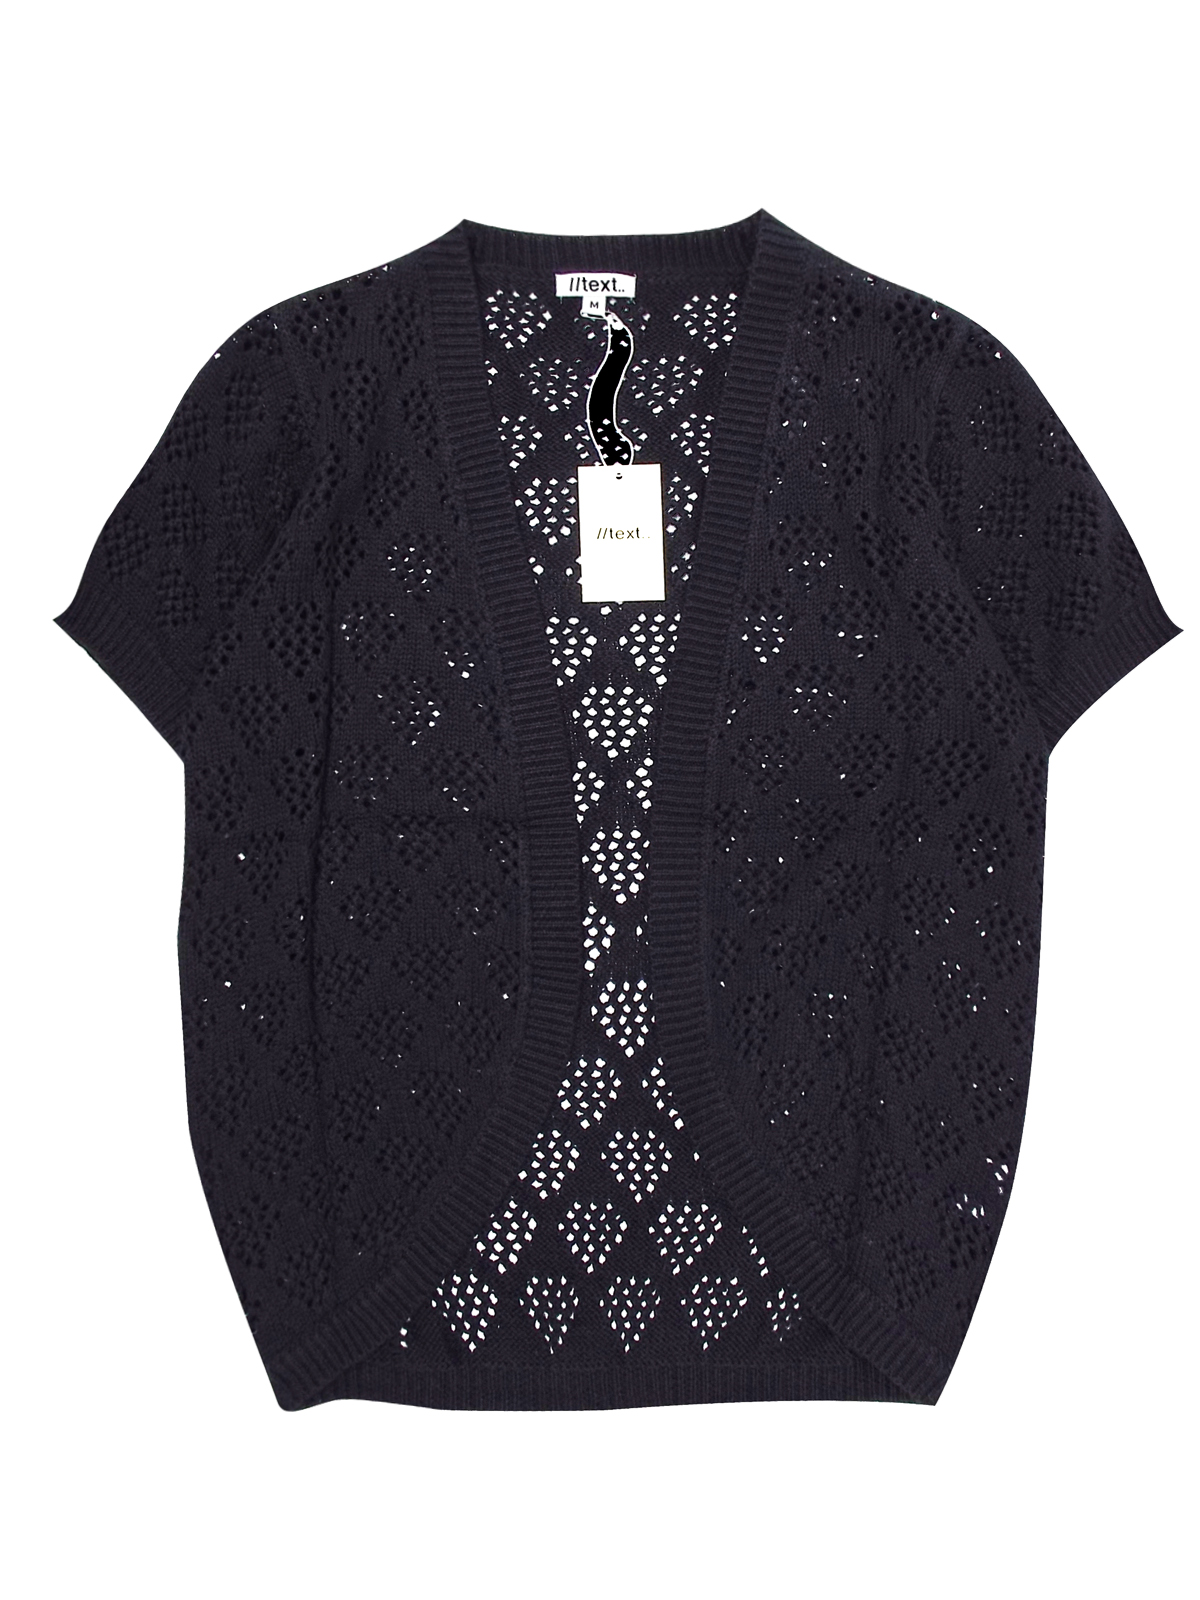 //text.. - - BLACK Short Sleeve Knitted Open Front Cardigan - Size ...